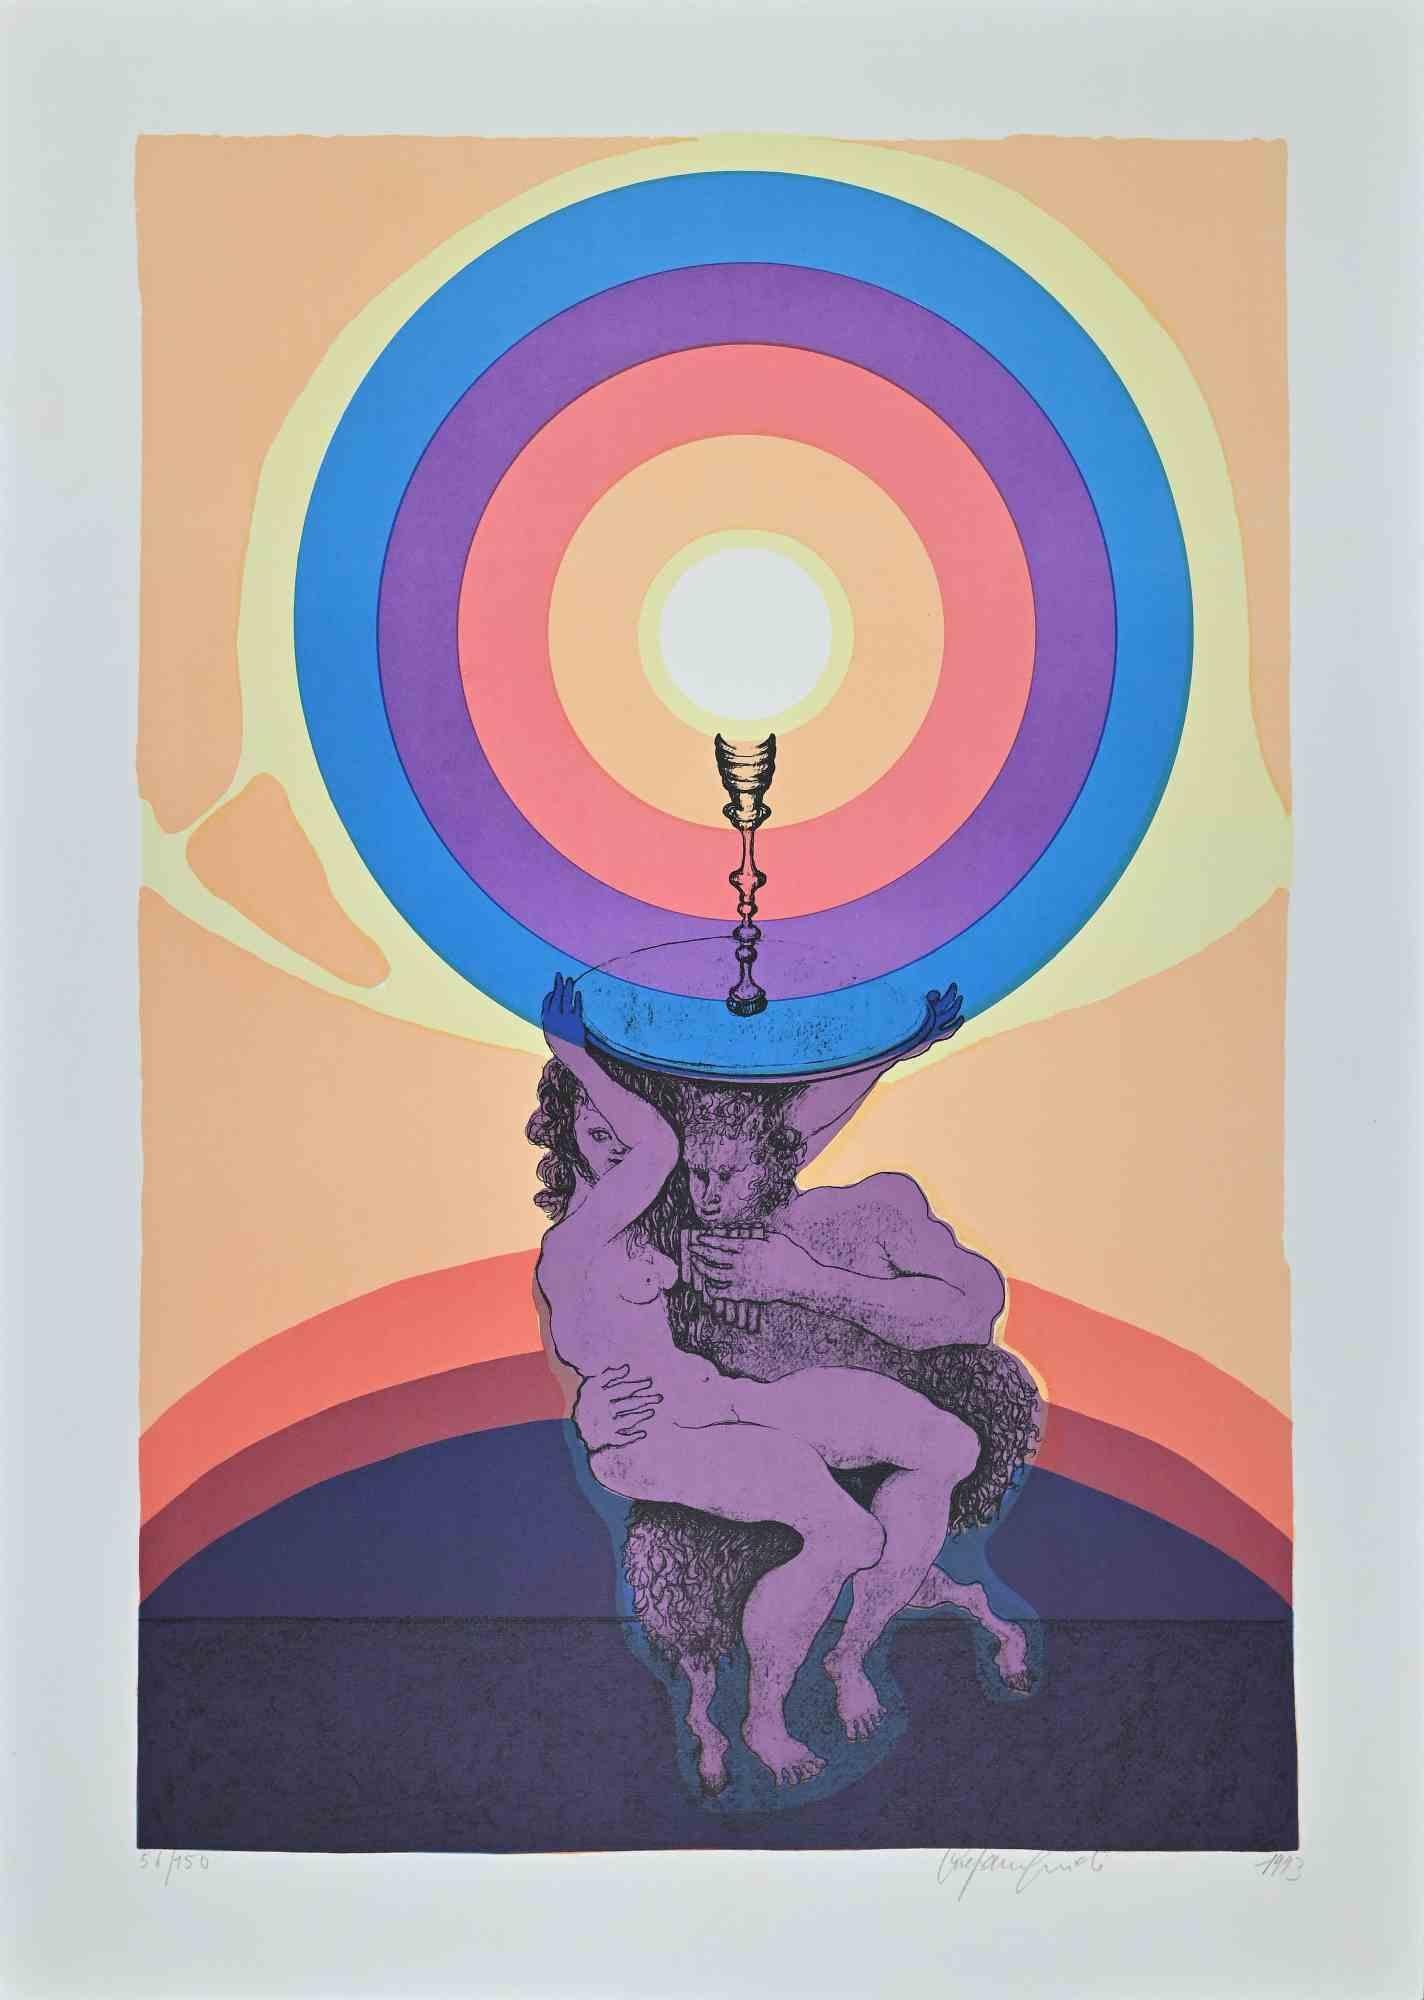 The Love is a beautiful colored lithograph realized by Stefania Guidi  in 1993.

Hand-signed in pencil on the lower right margin. Dated on the lower right. Numbered on the lower left. Edition 56/150.

Original title: "Amore".

Good